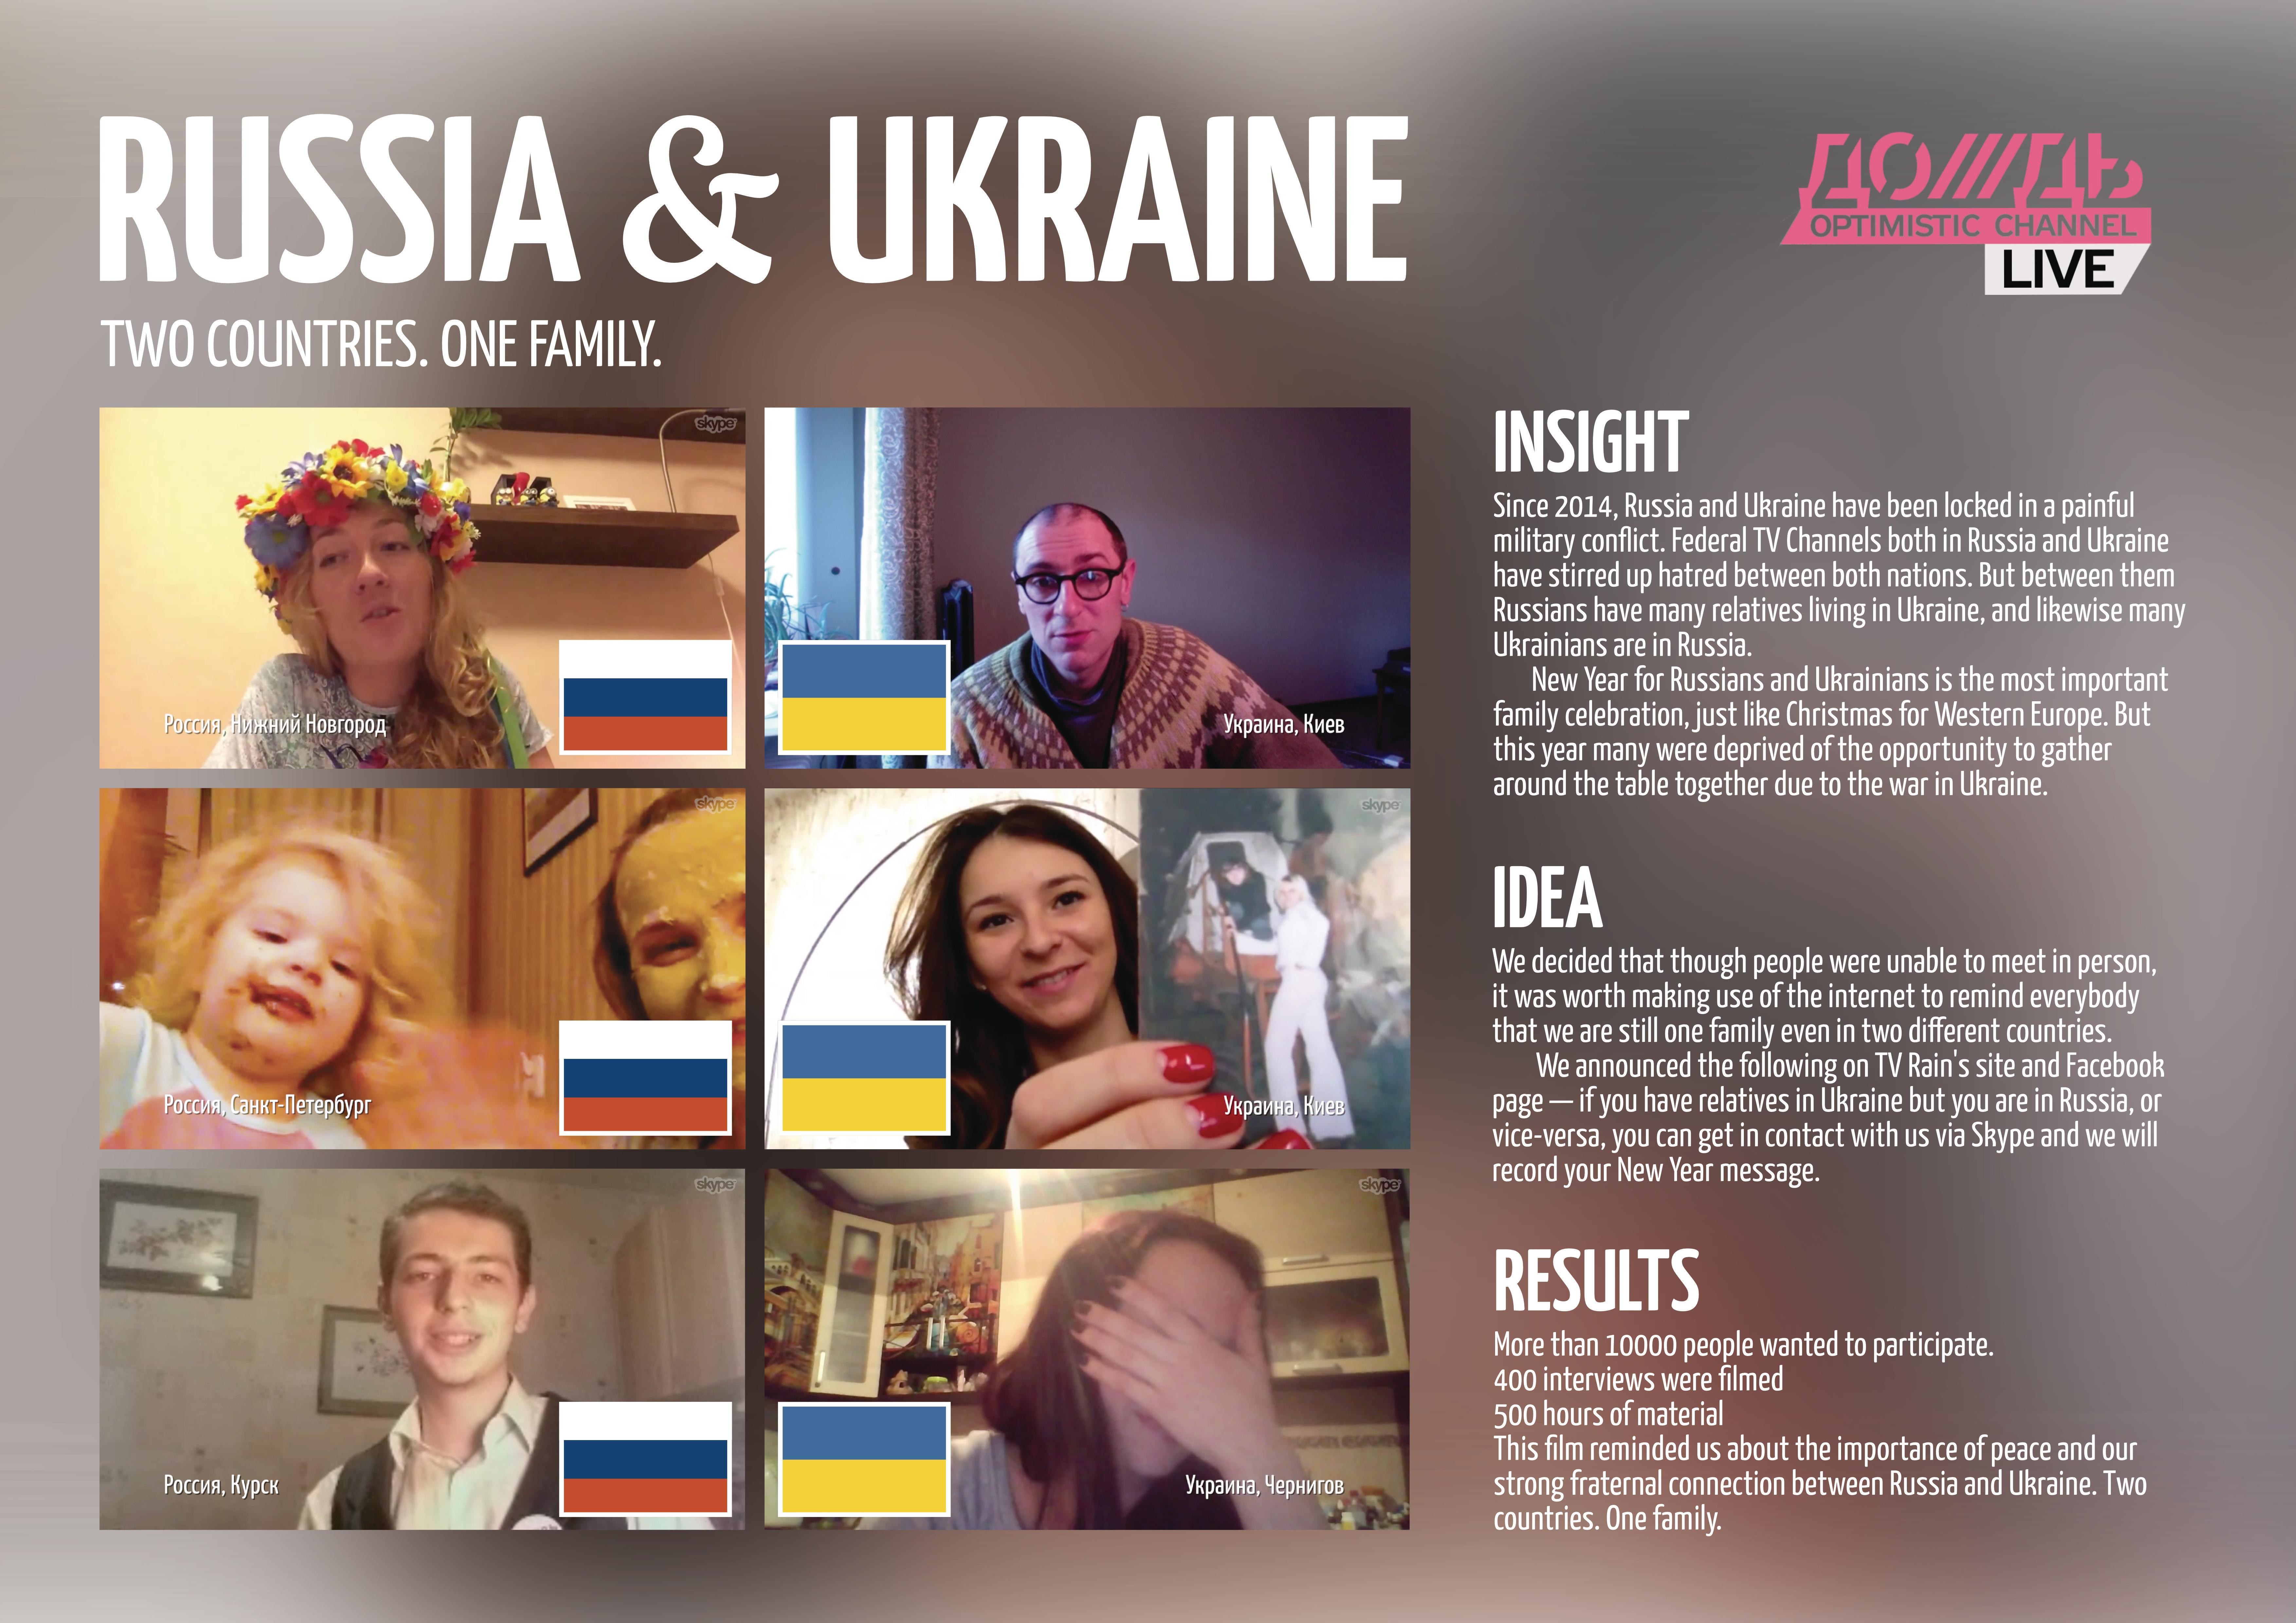 RUSSIA AND UKRAINE. TWO COUNTRIES. ONE FAMILY